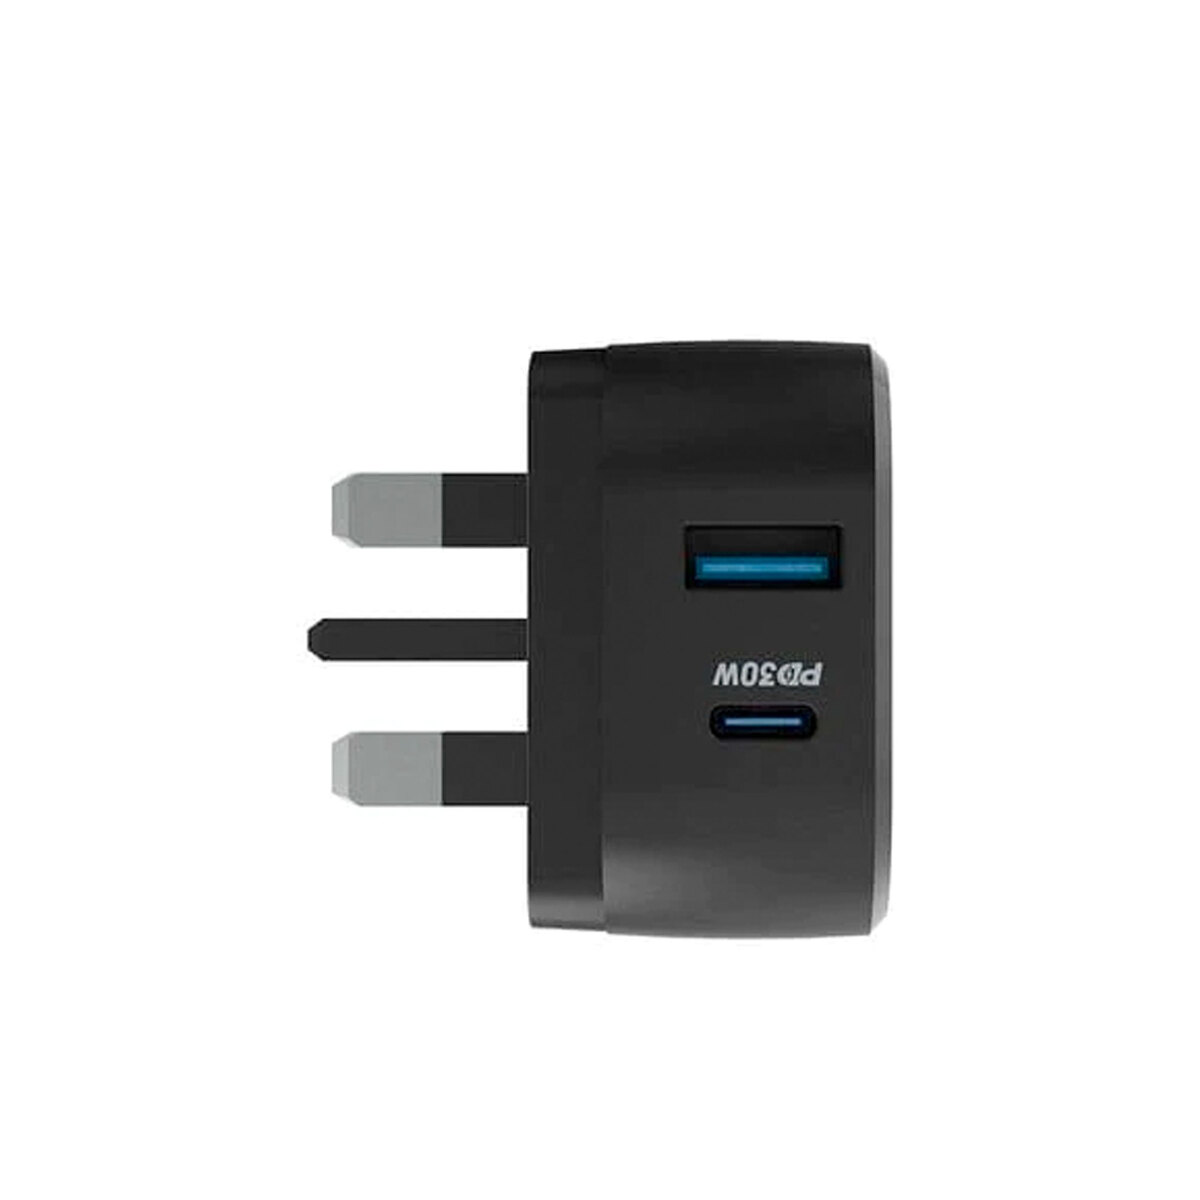 Powerology PWCUQC002 Ultra-Compact Quick Charger 30W USB-C Power Delivery, Black